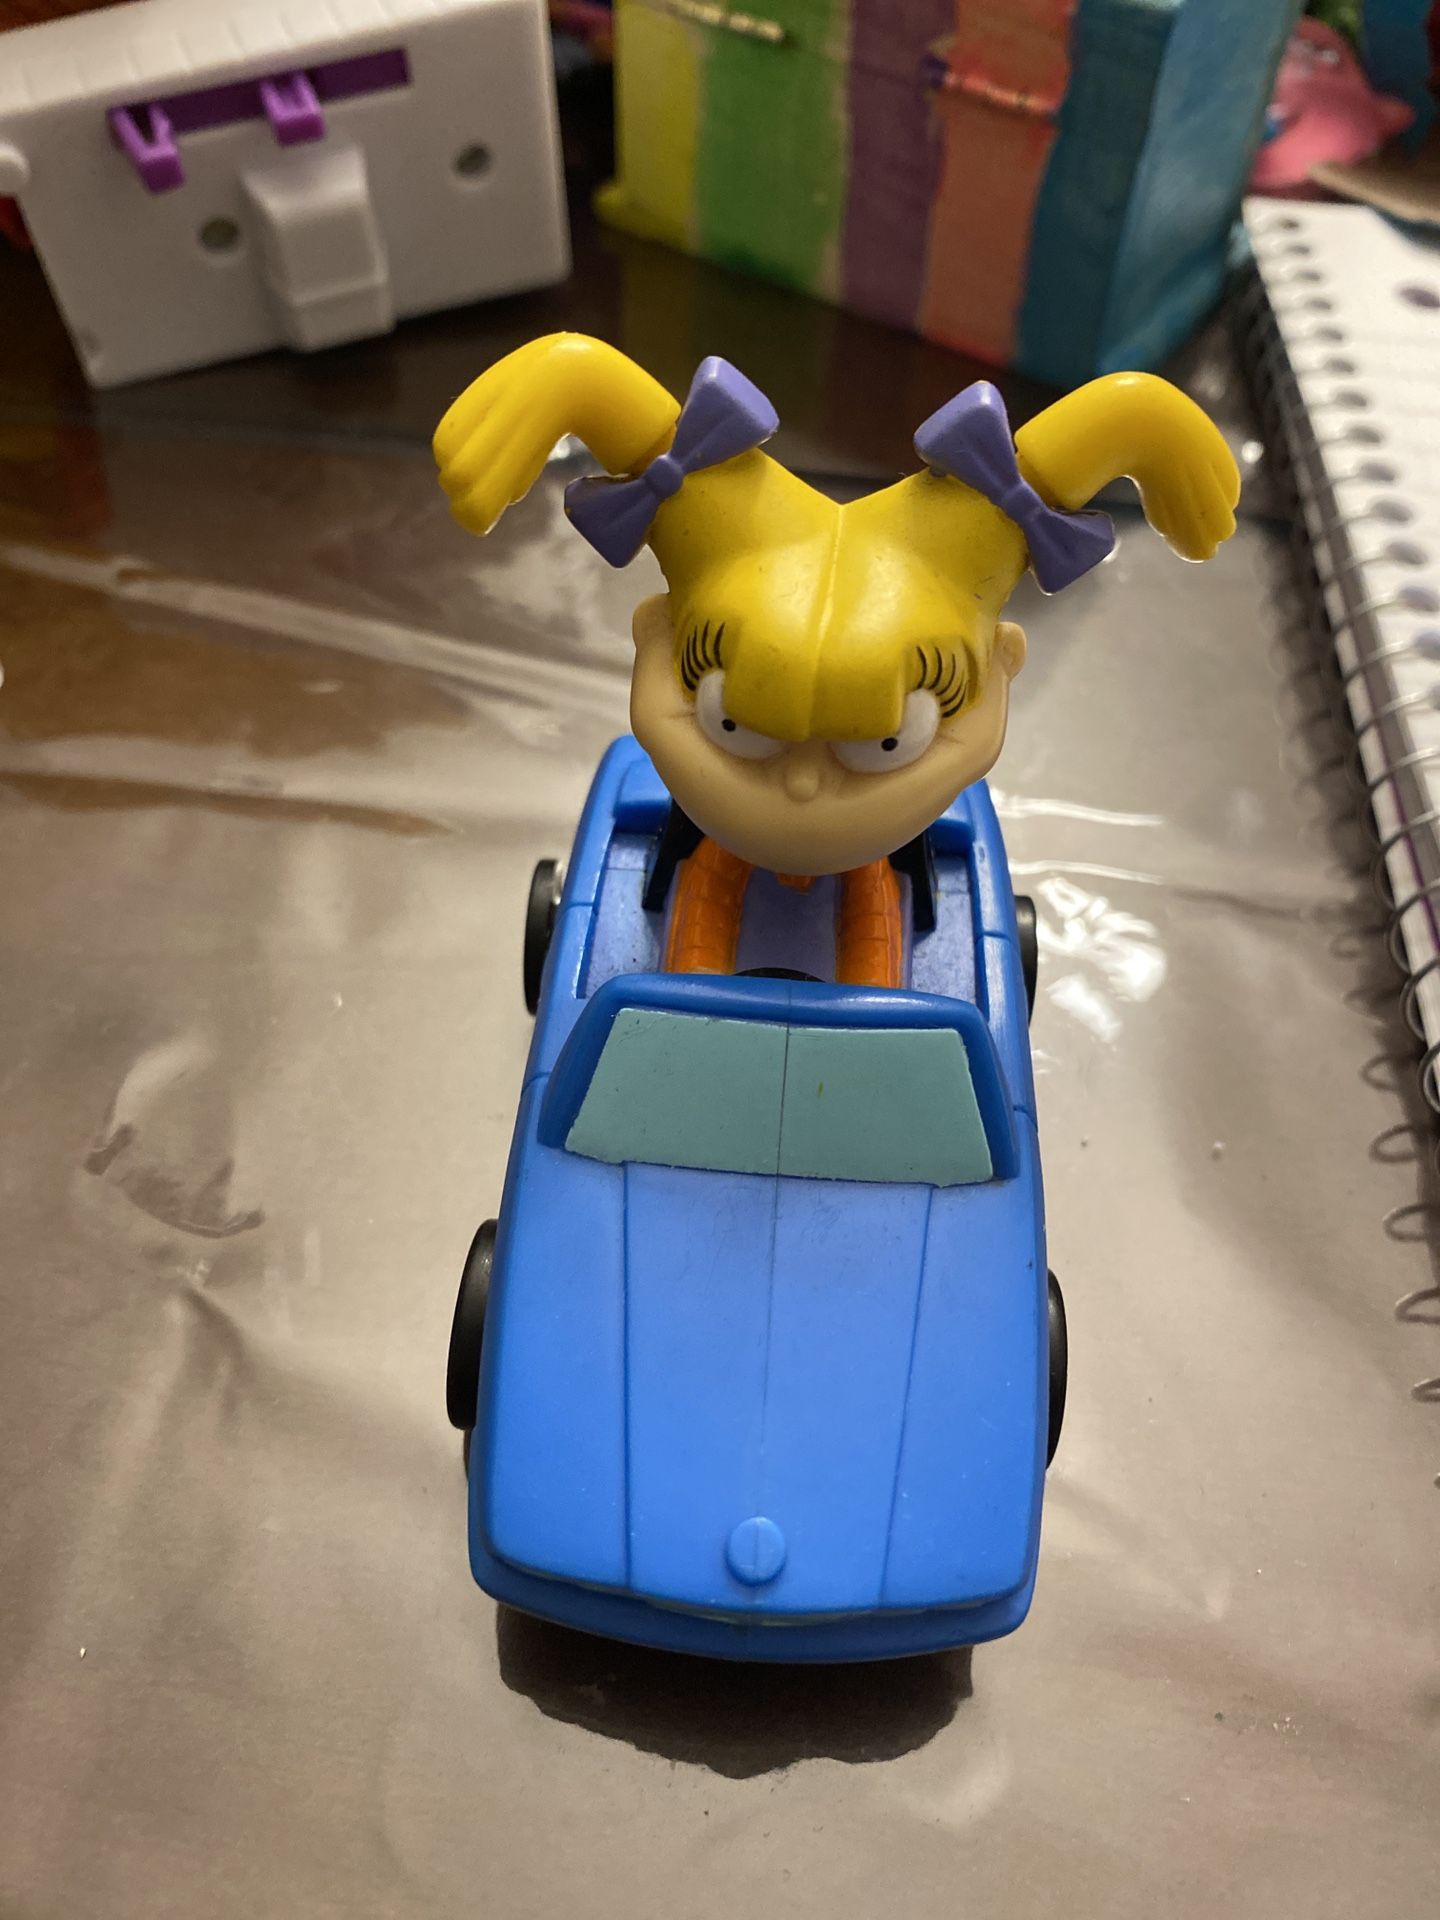 1998 Angelica Pull & Go Blue Car 3" Burger King Kid's Meal Action Figure Rugrats